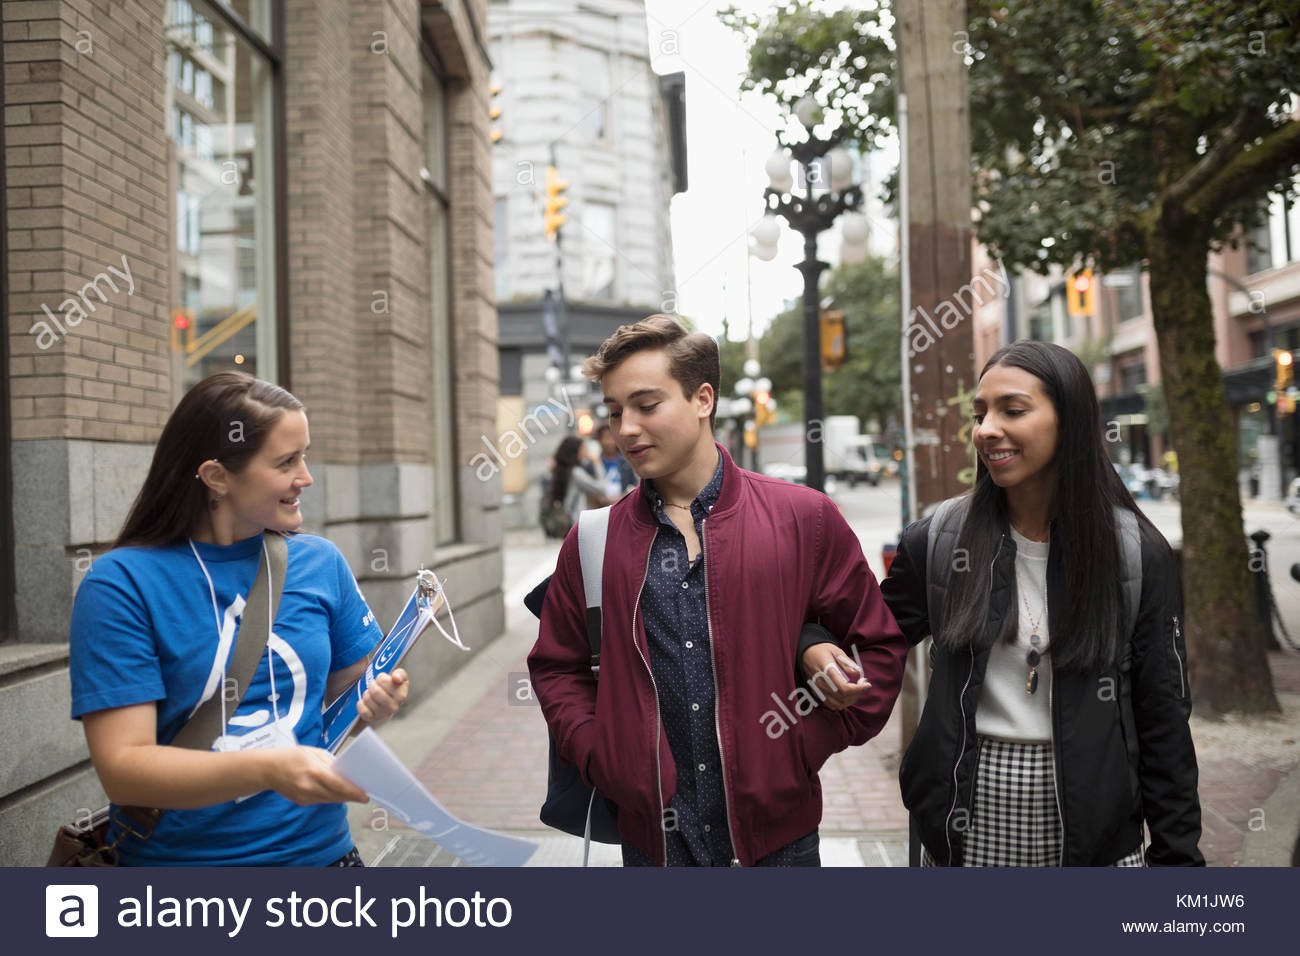 Political young woman canvassing on urban sidewalk, showing petition to young couple Stock Photo